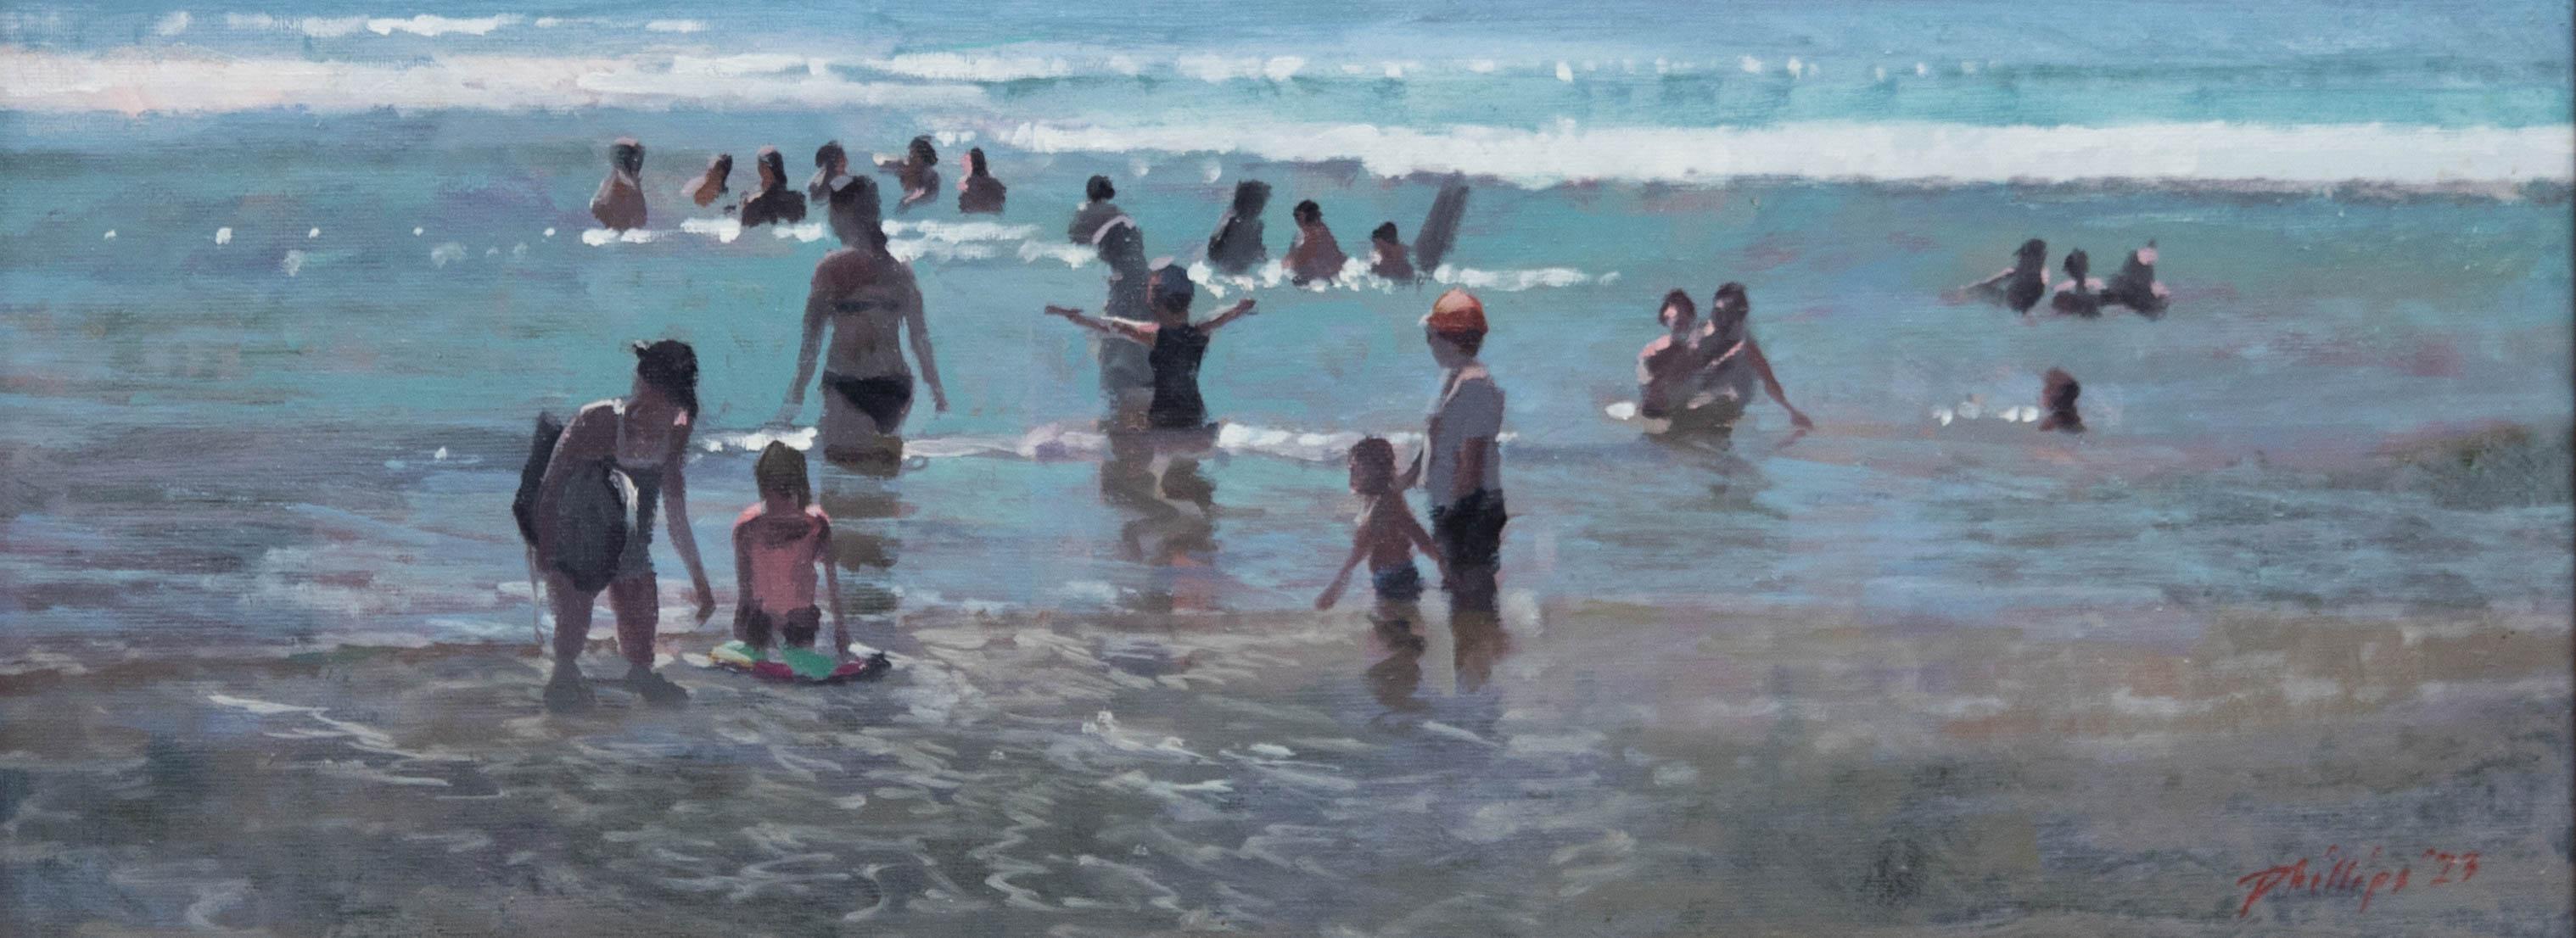 Peter Z. Phillips - Framed Contemporary Oil, Swimmers - Painting by Peter Phillips